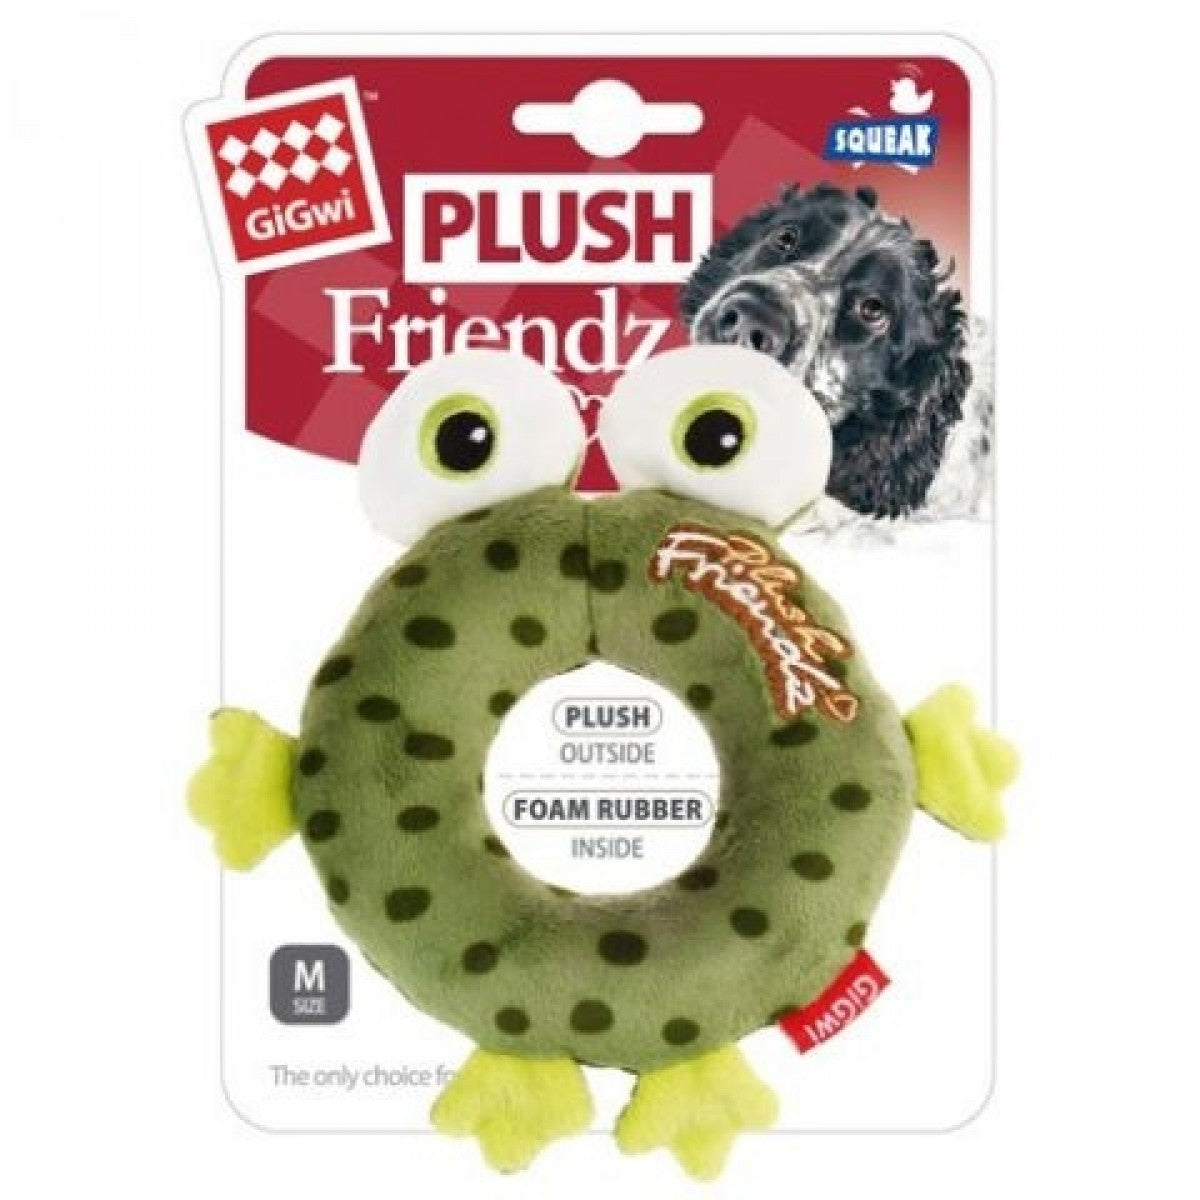 PLUSH FRIENDZ With Foam Rubber Ring and Squeaker - Frog